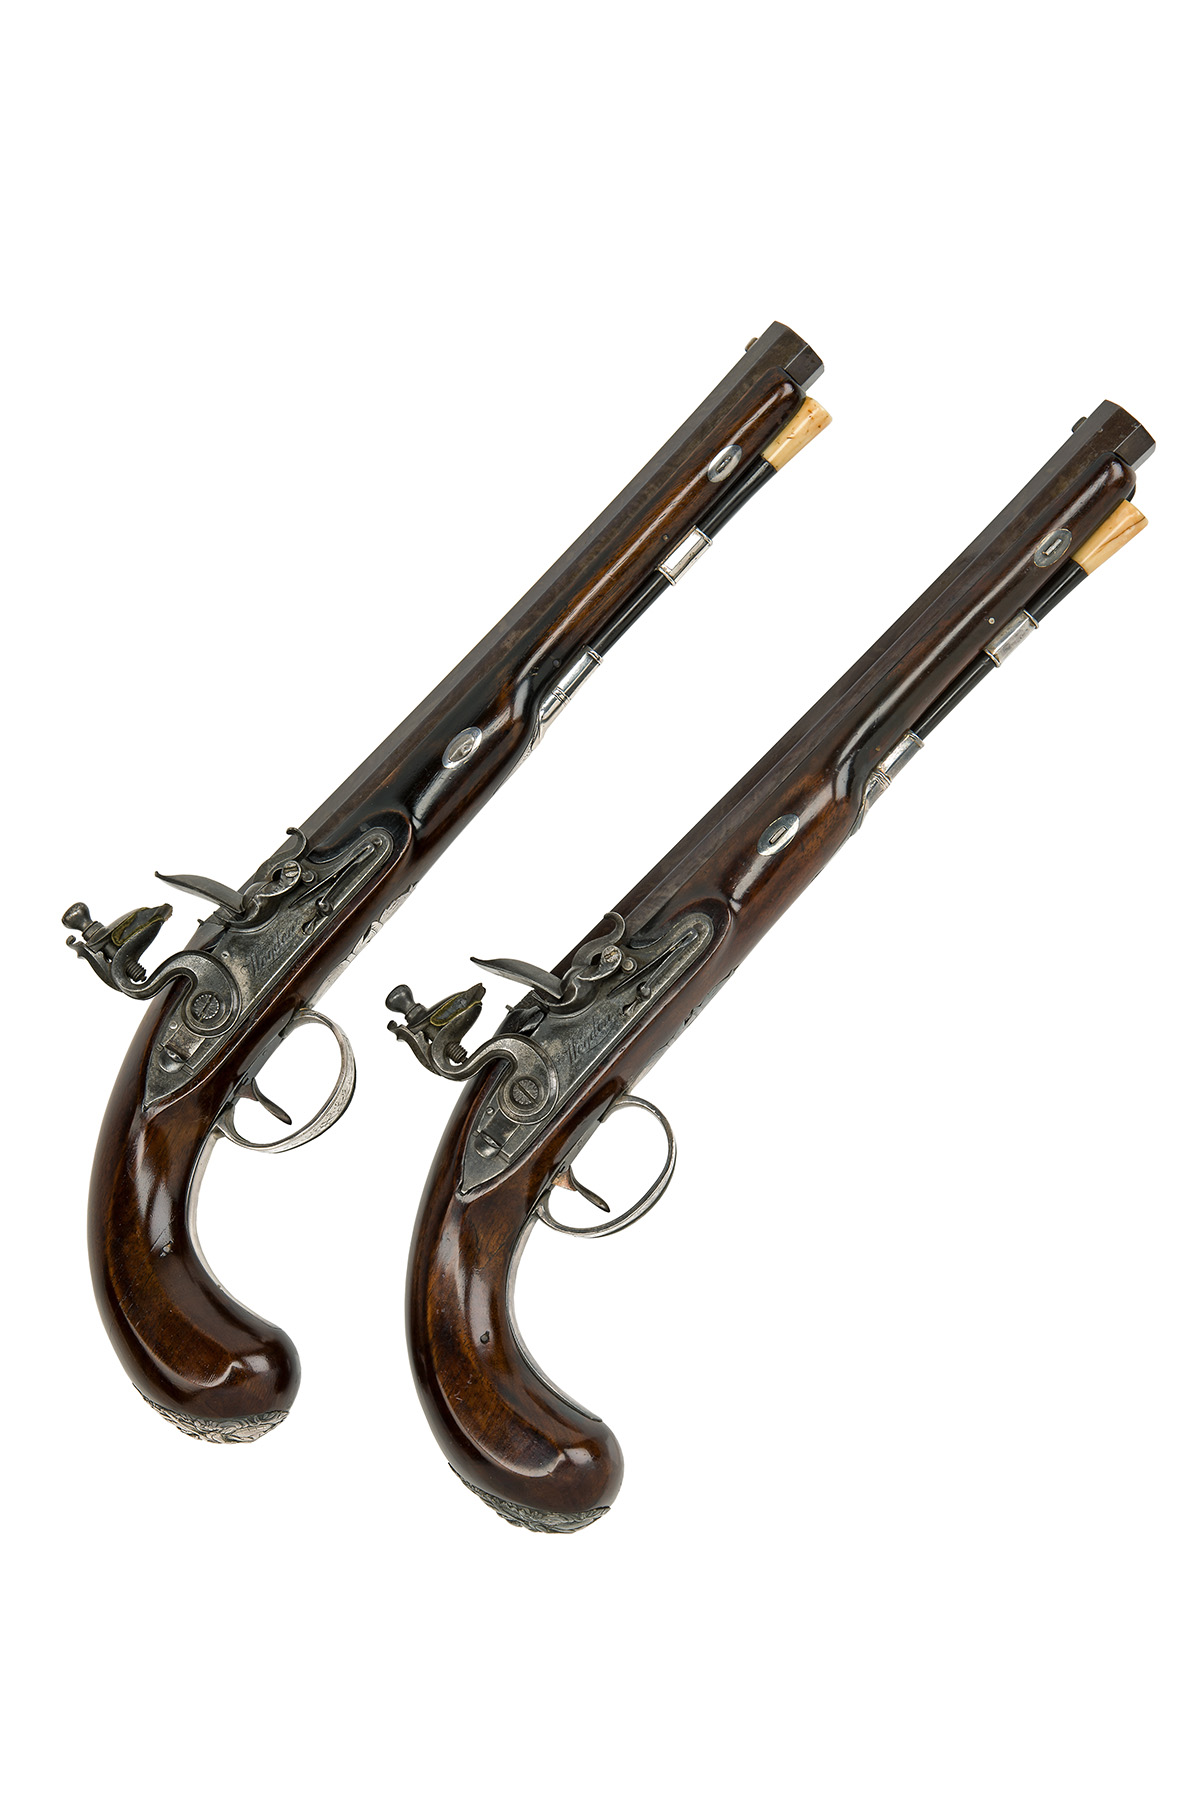 WOGDON, LONDON A PAIR OF 28-BORE FLINTLOCK SILVER-MOUNTED DUELLING PISTOLS, no visible serial